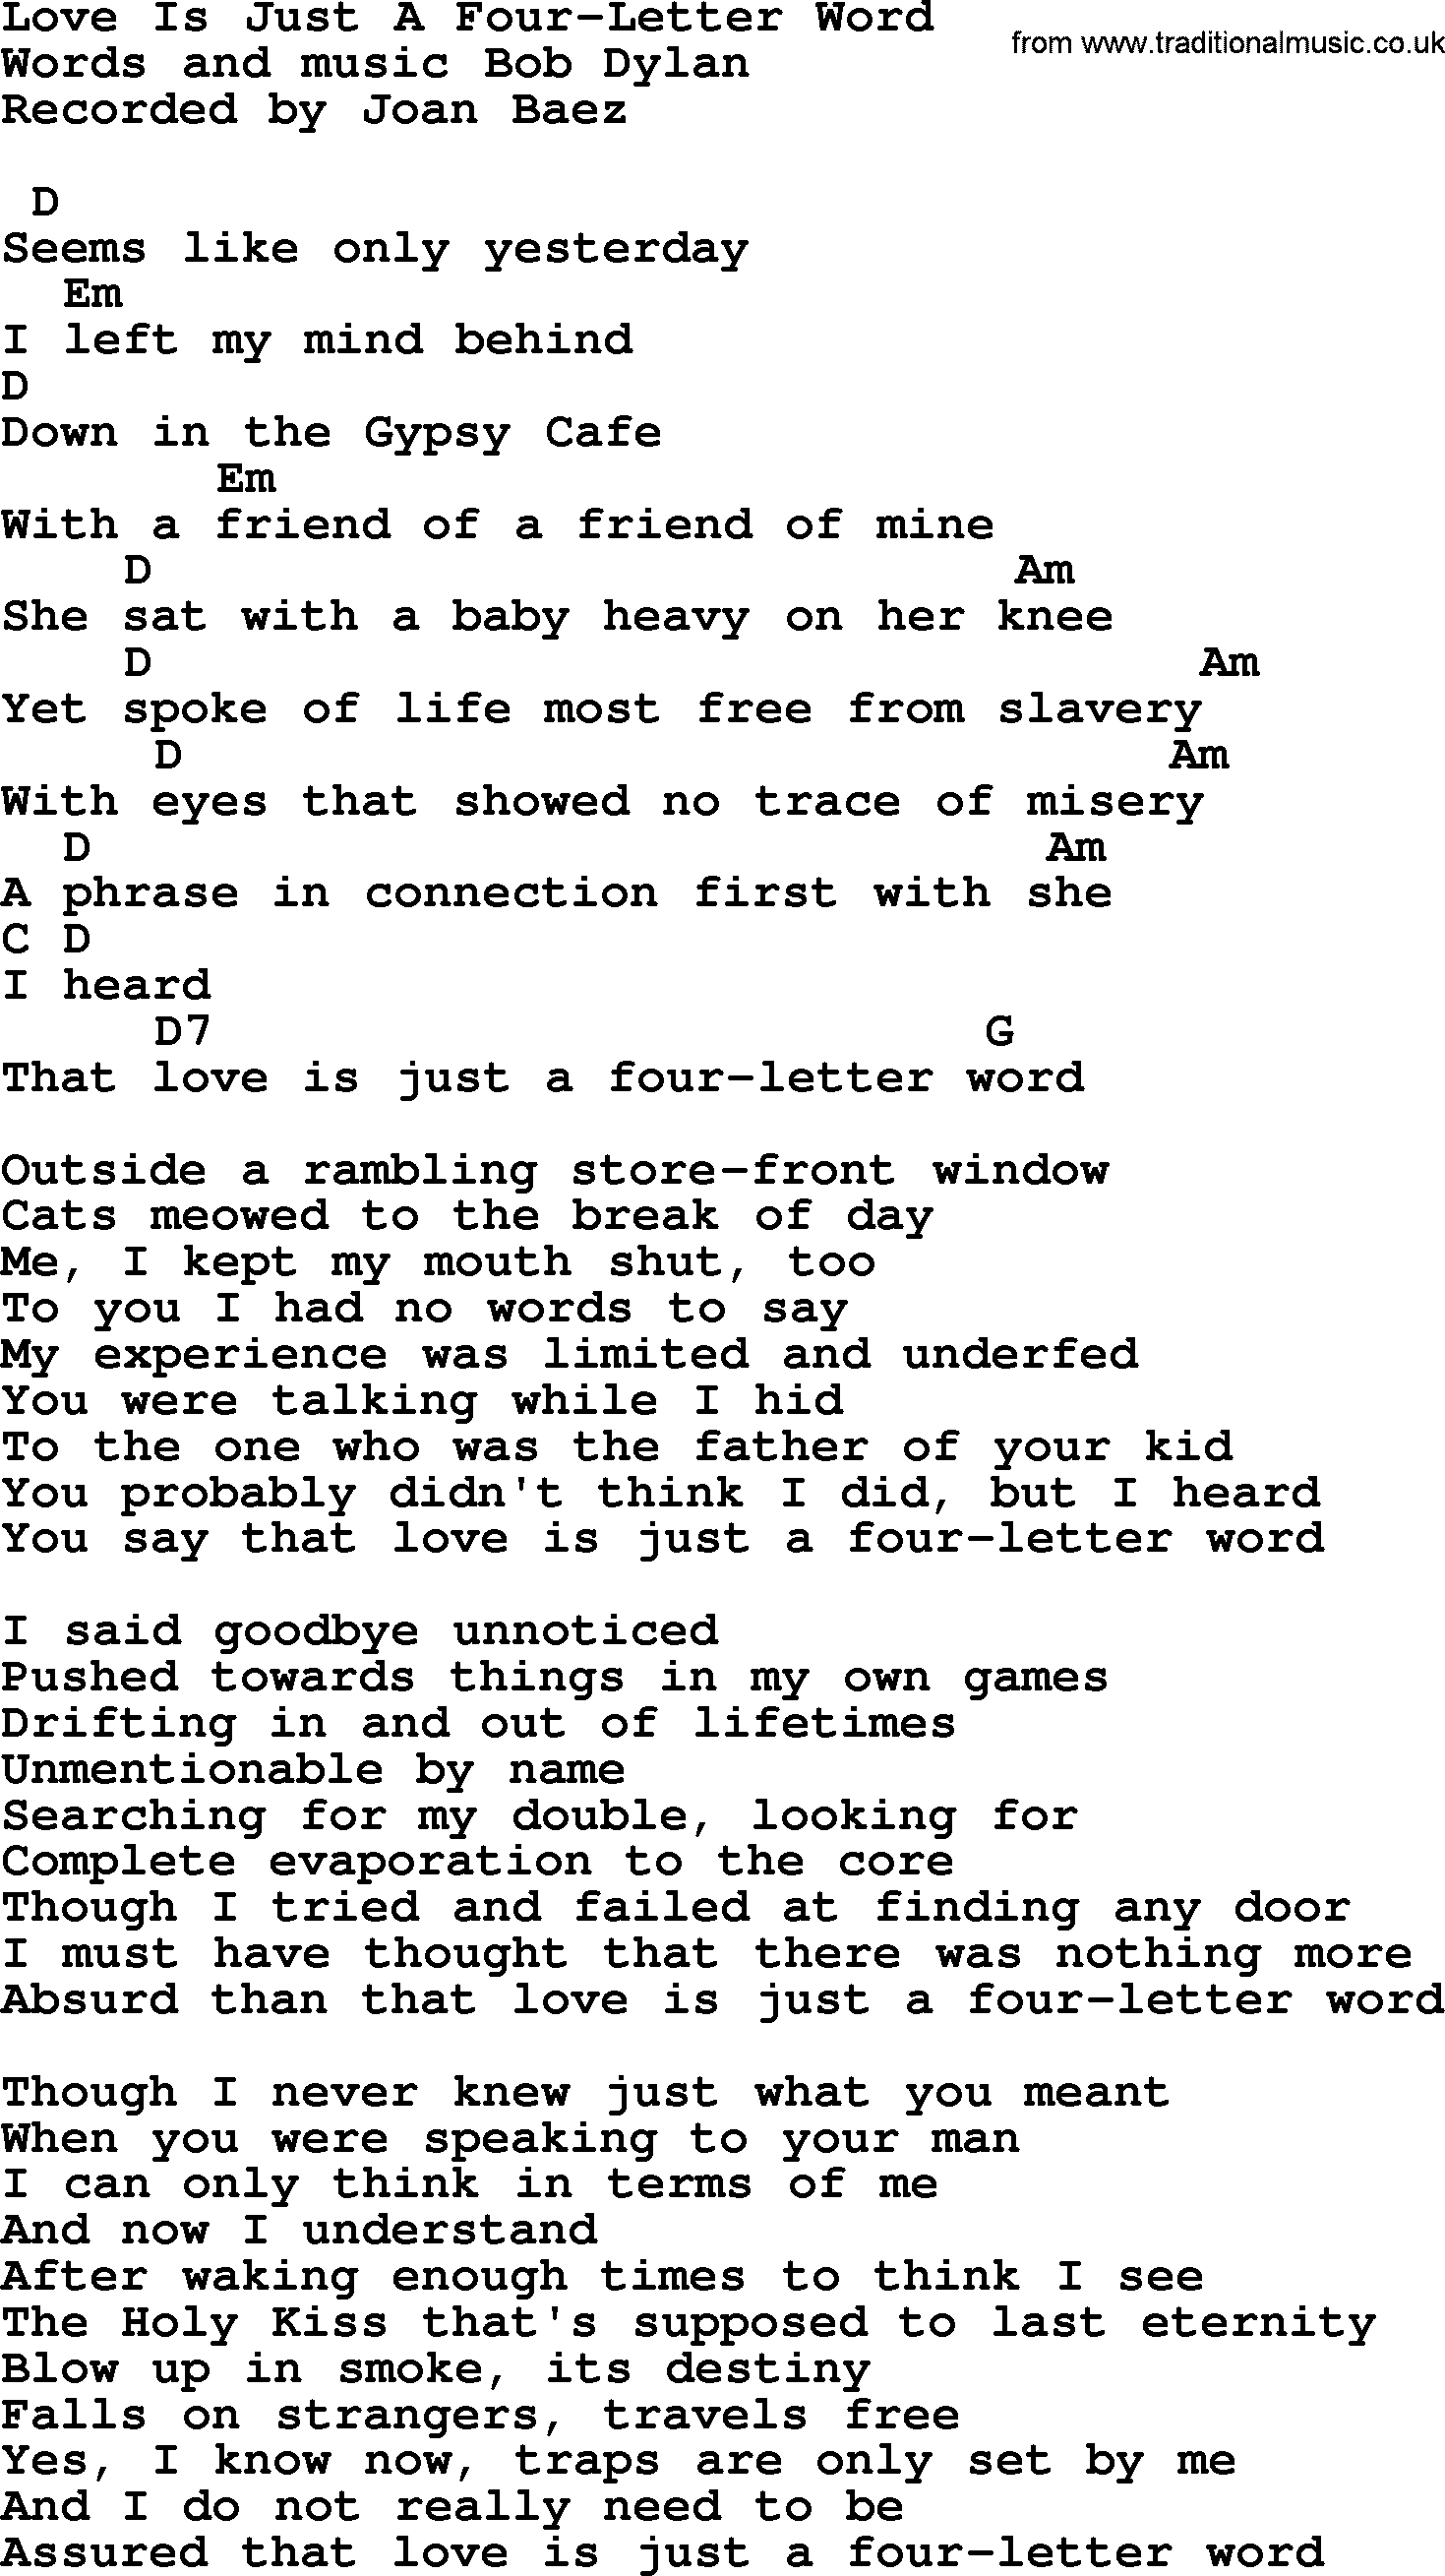 Bob Dylan song, lyrics with chords - Love Is Just A Four-Letter Word